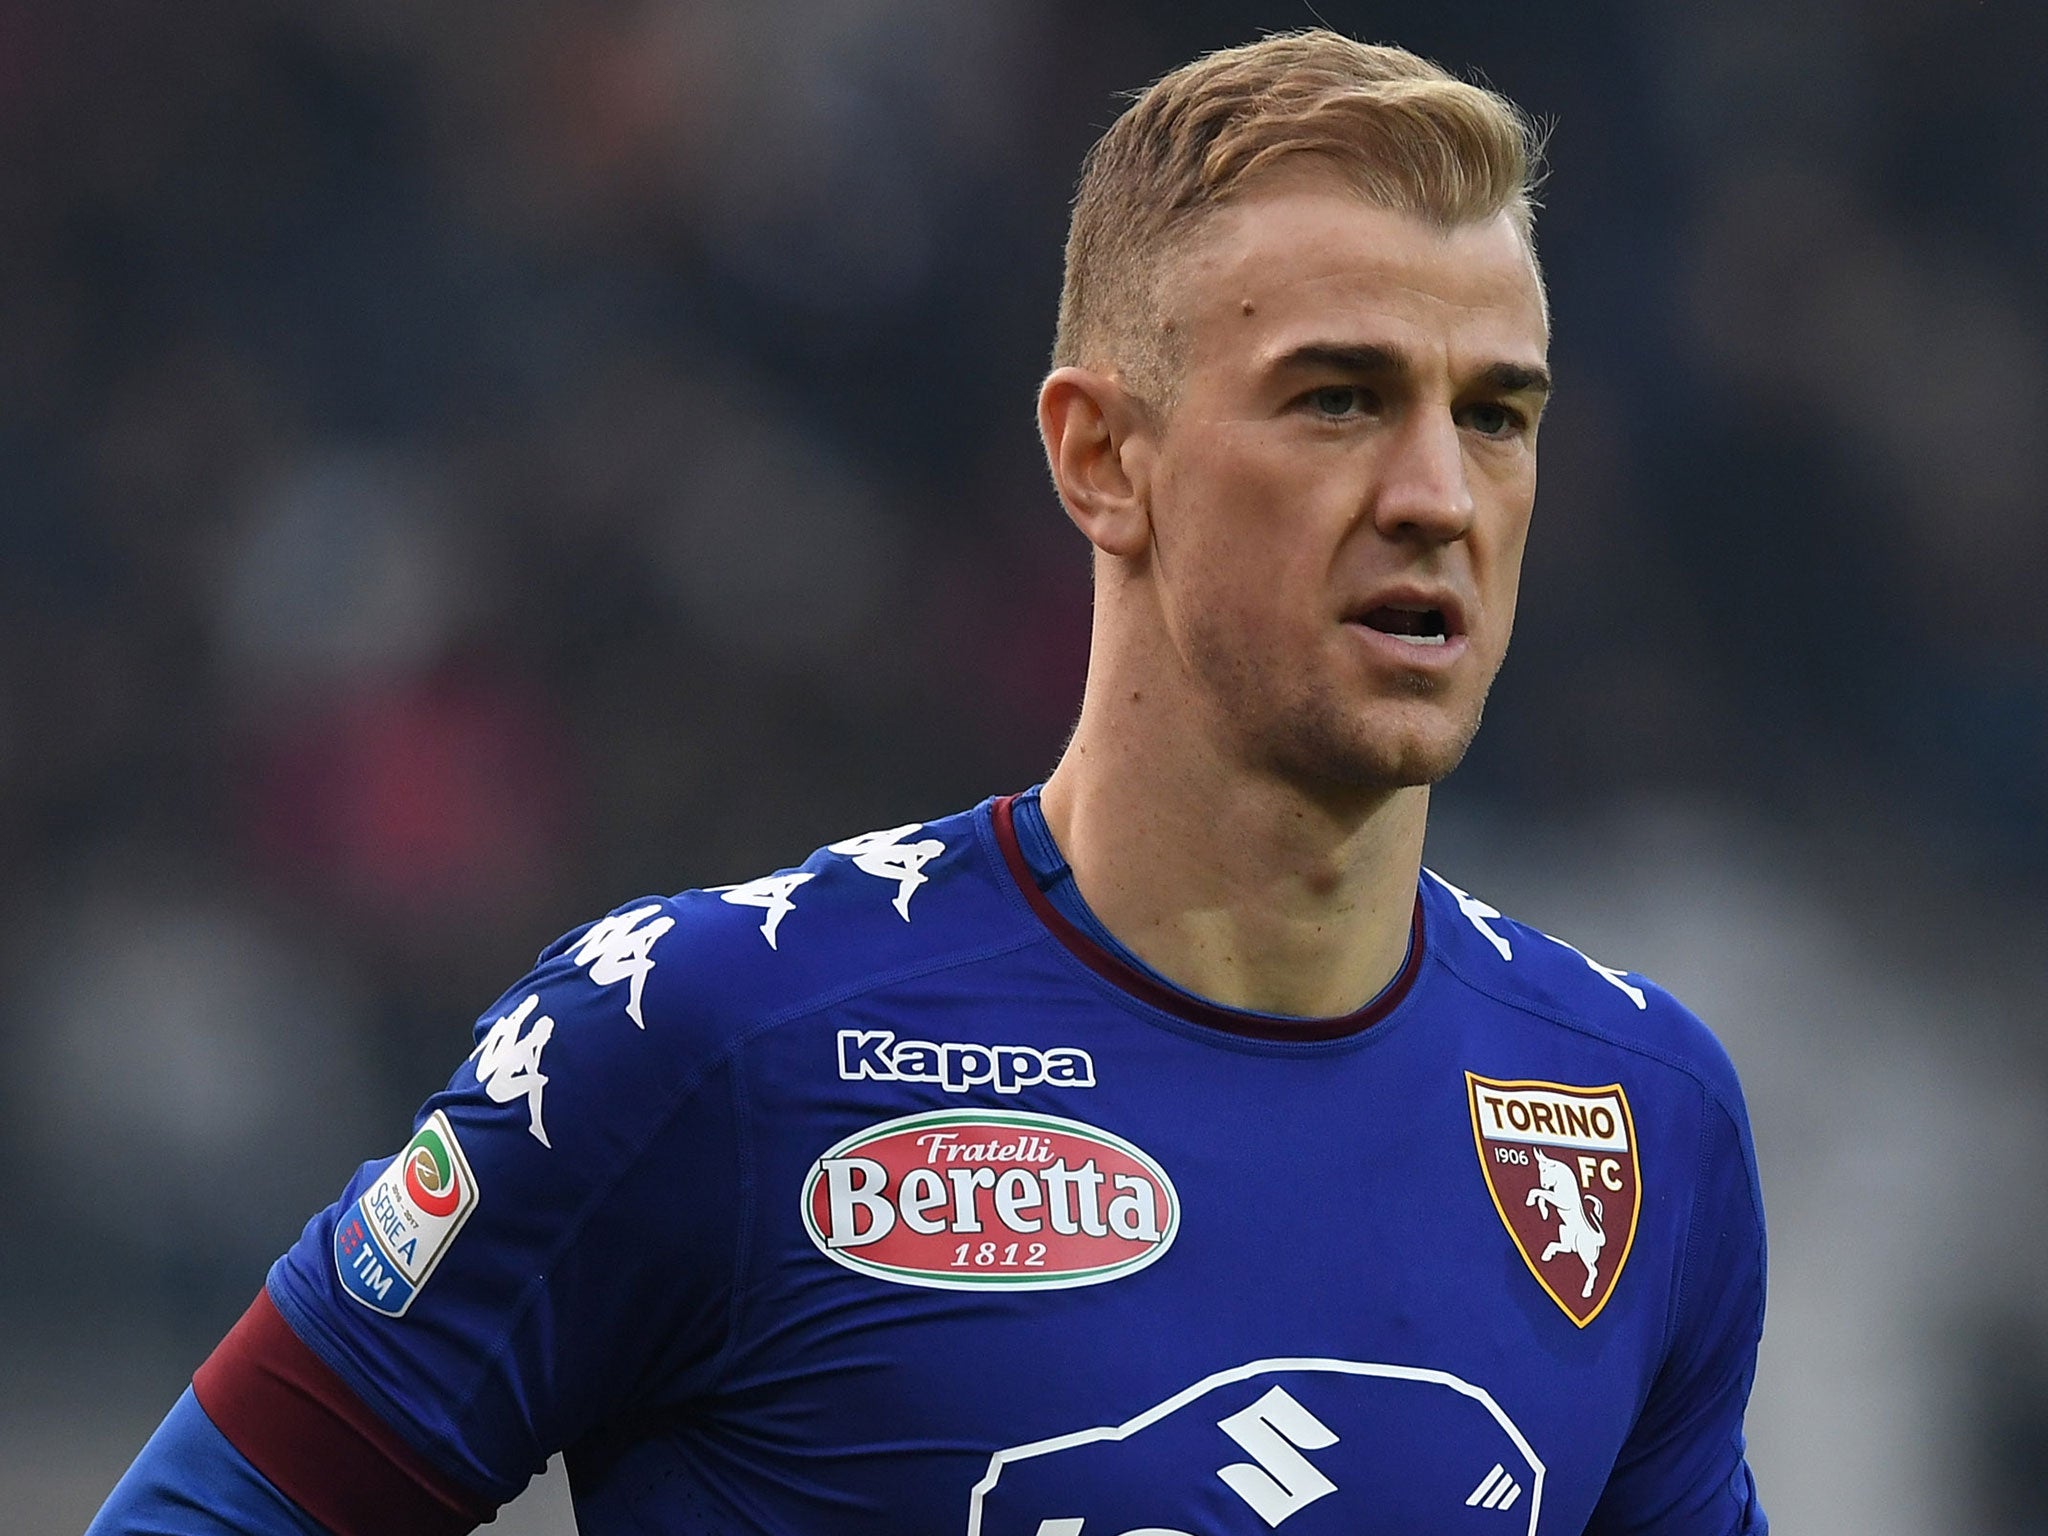 Joe Hart is currently on loan with Torino but Jamie Carragher wants Liverpool to sign him in January